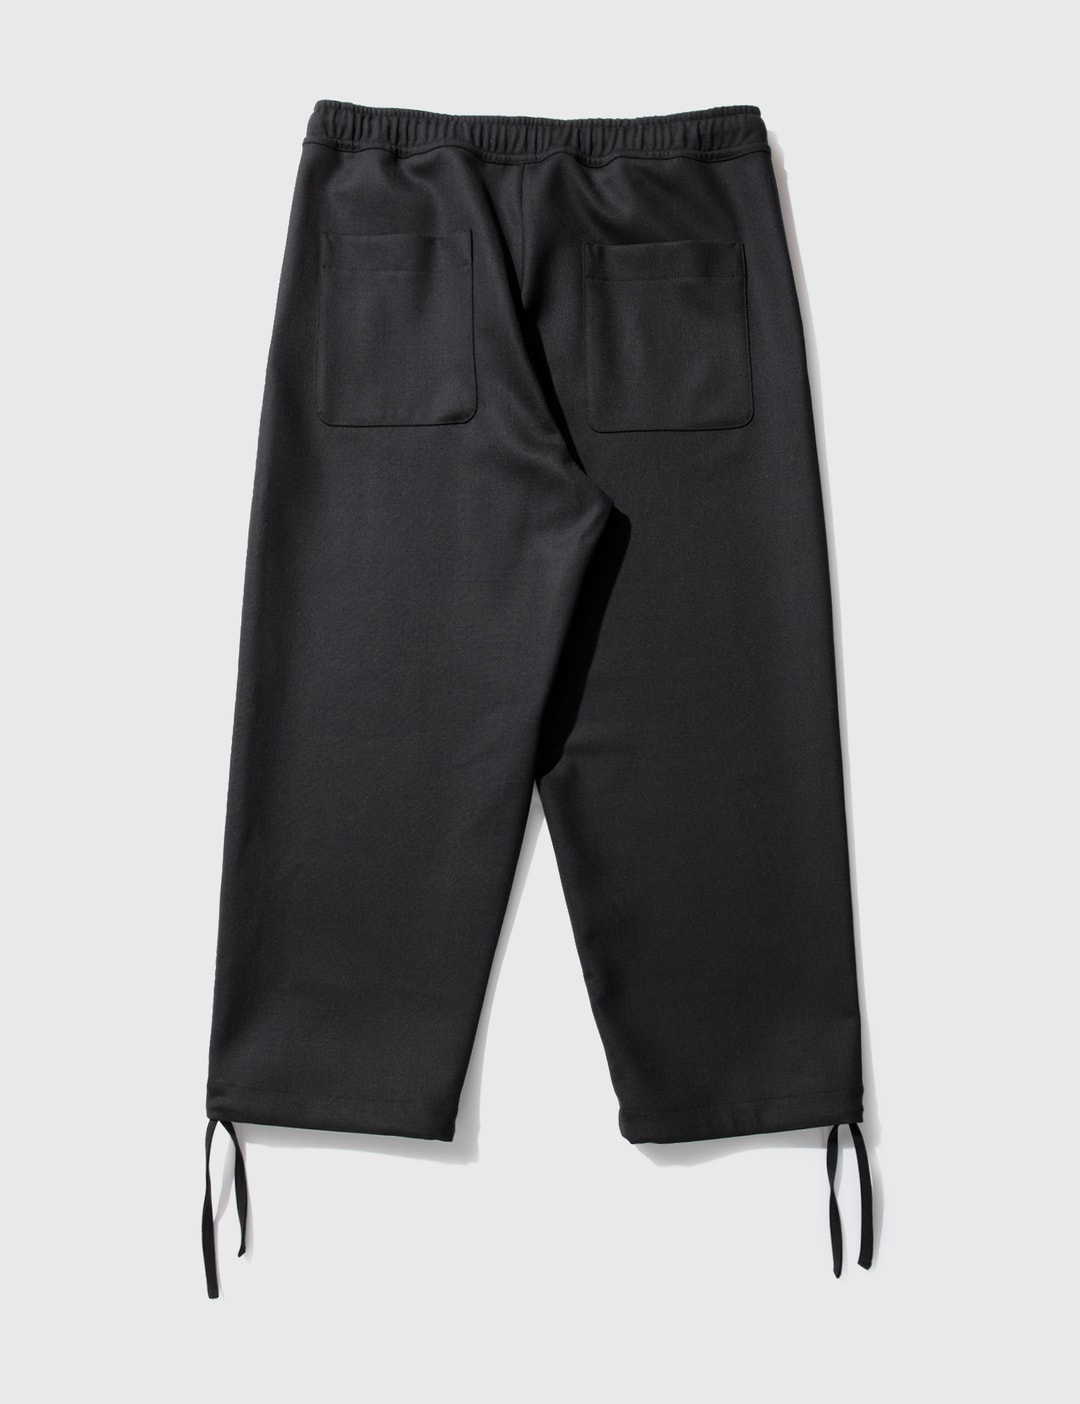 Ami - Elasticized Pants | HBX - Globally Curated Fashion and Lifestyle ...